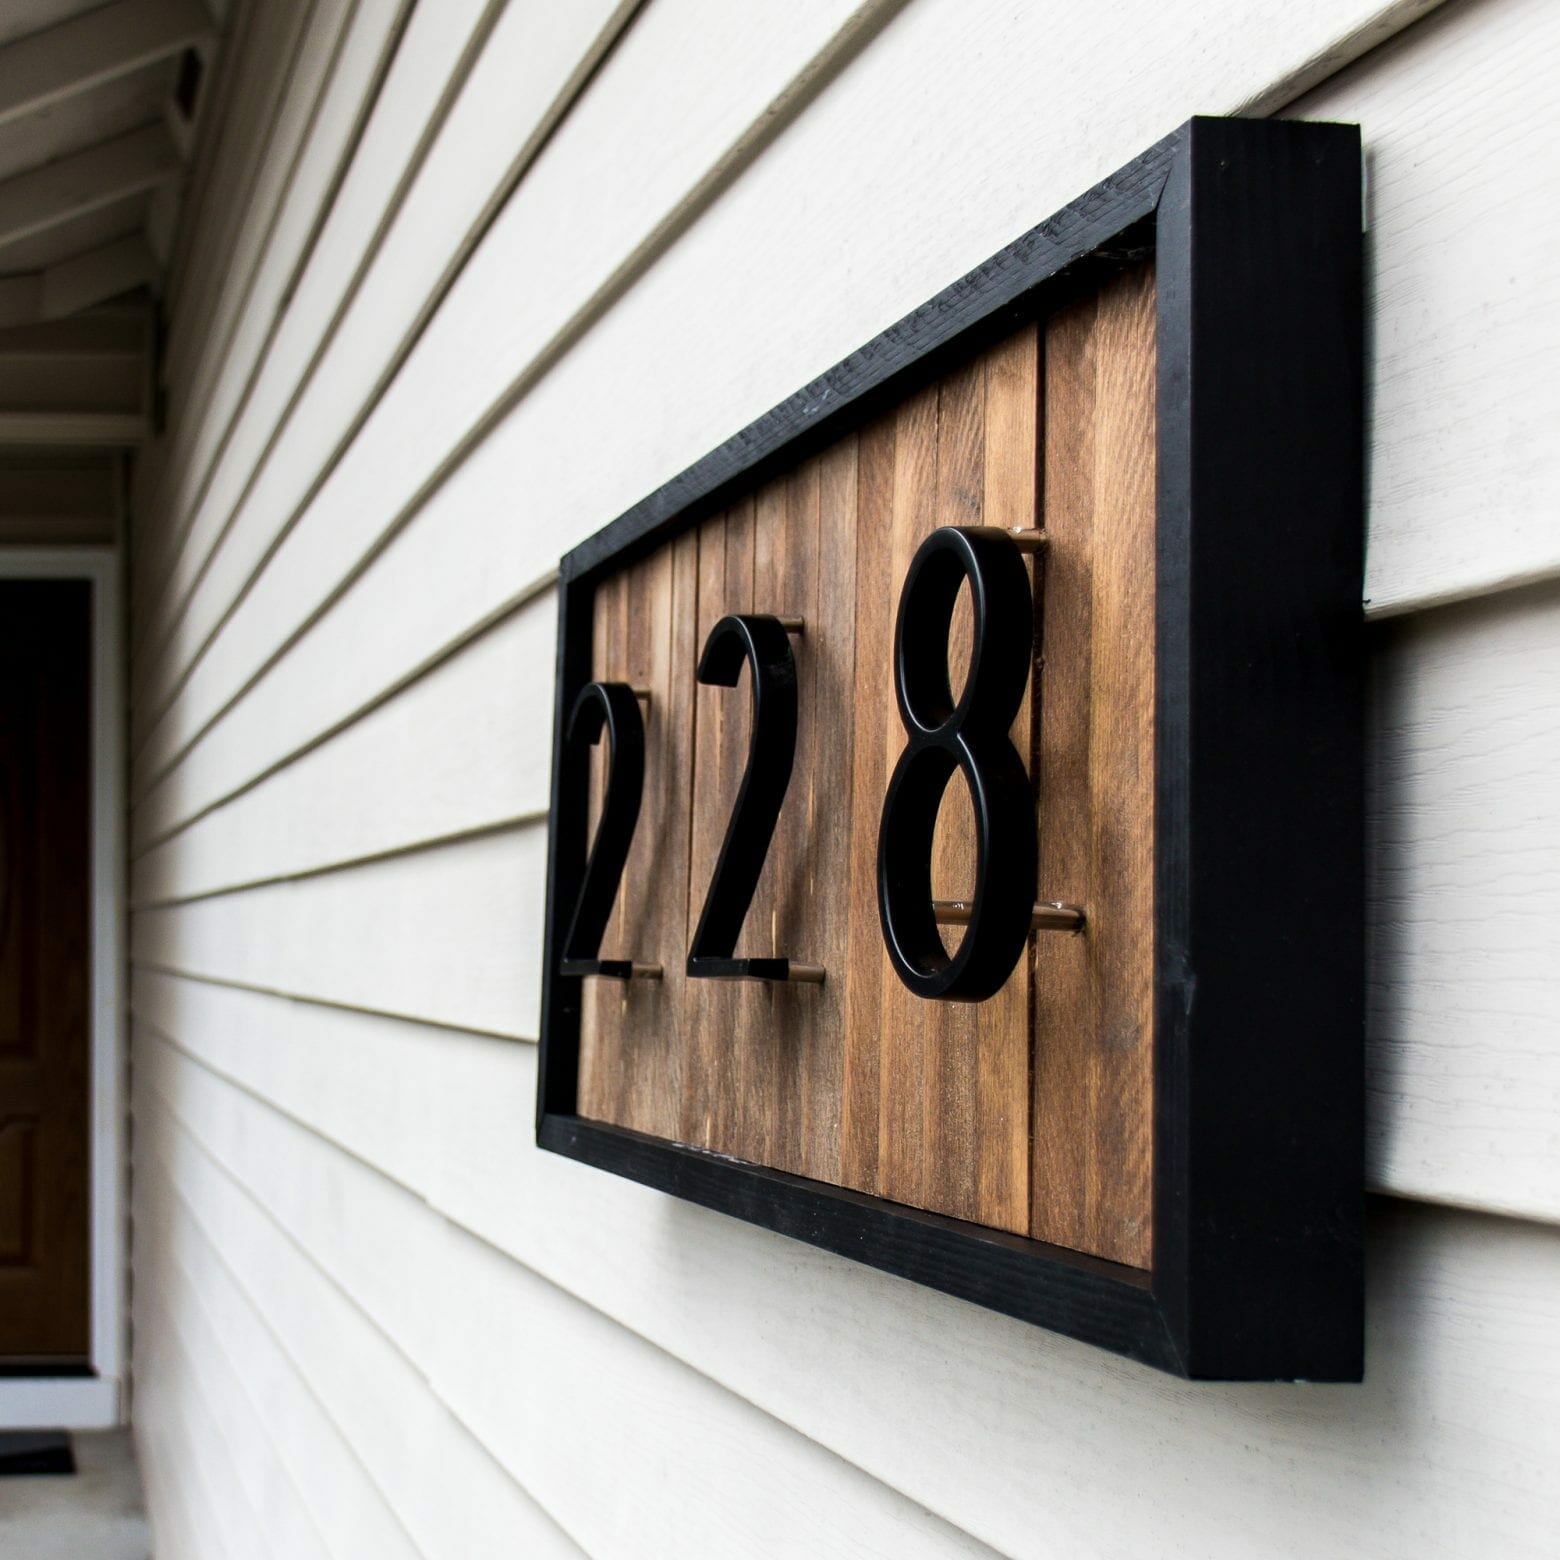 How To Attach House Numbers To Vinyl Siding